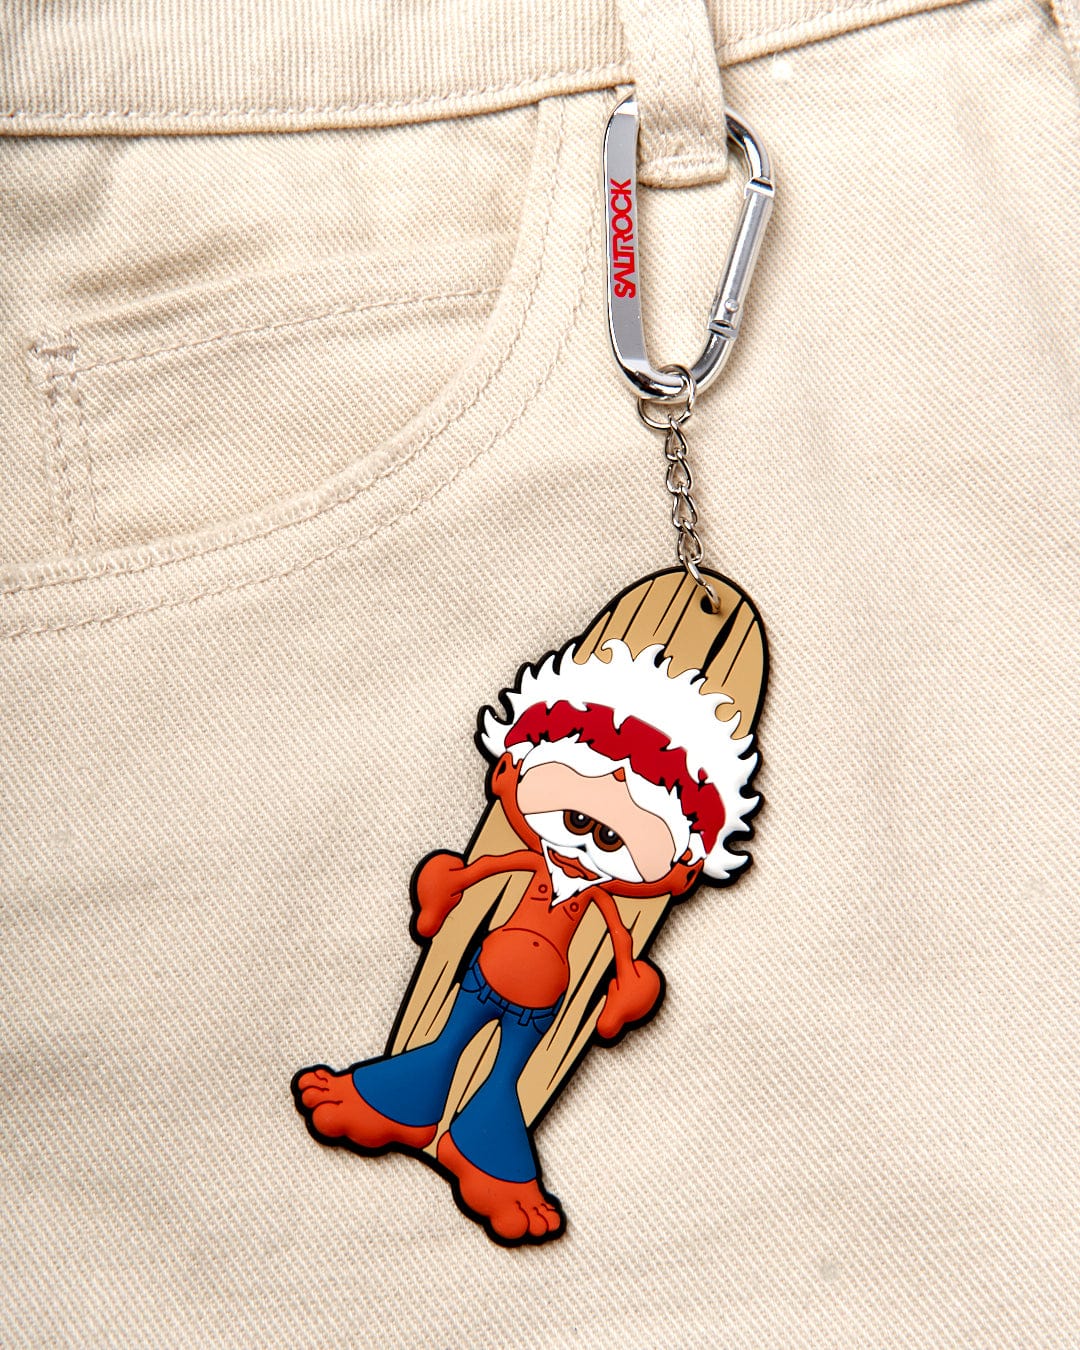 A keychain with a cartoon character, Saltrock Woodstock Keyring, attached.